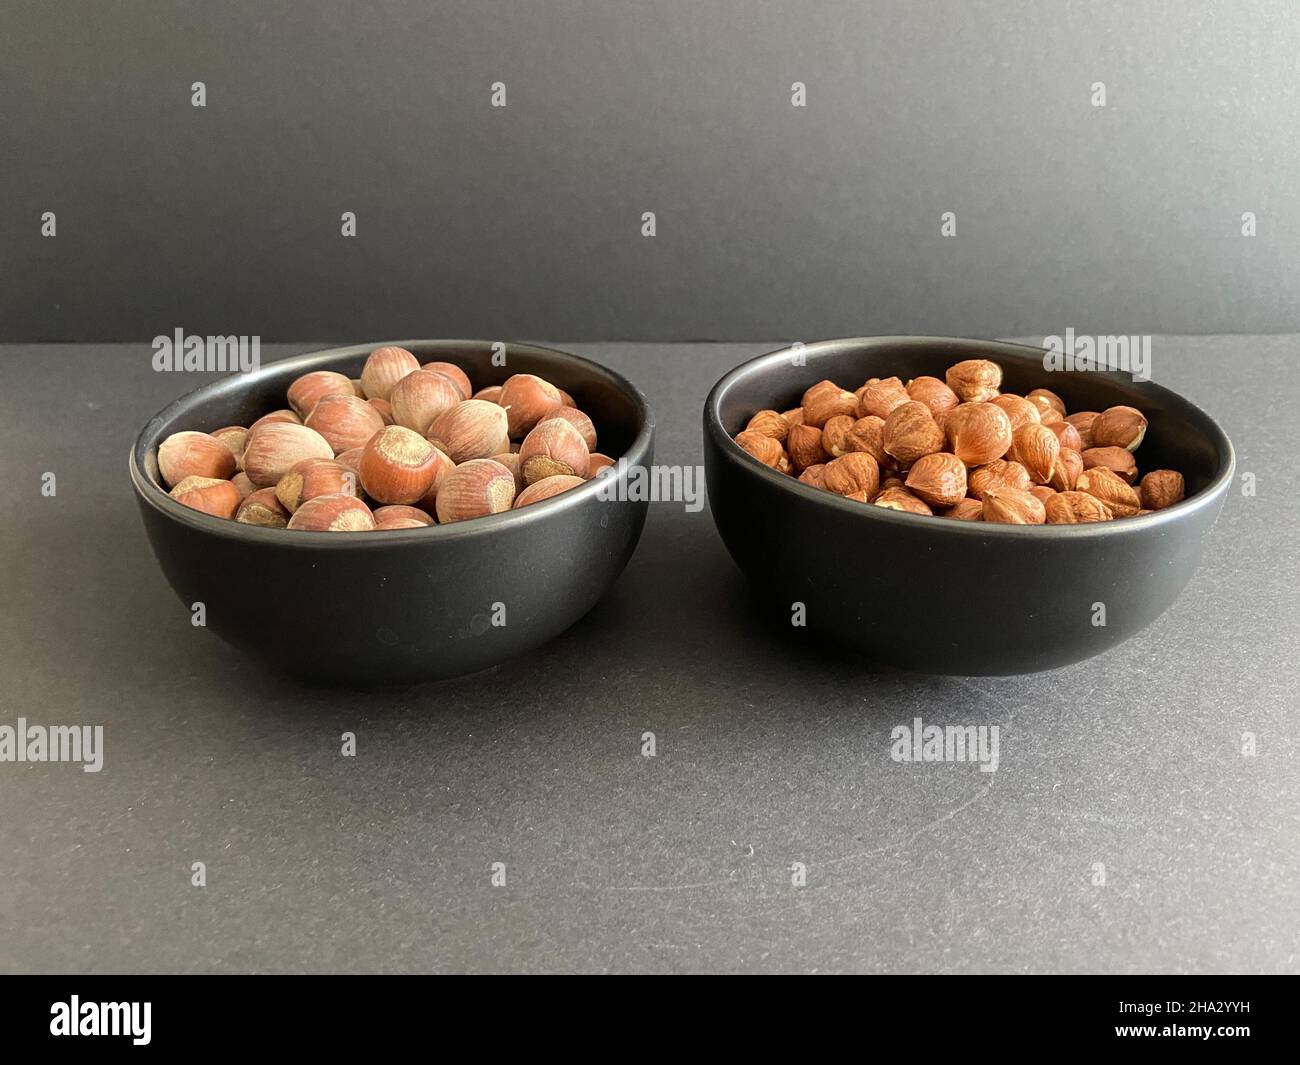 Nuts, hazelnuts in abowl with black background. Food concept and idea. Stock Photo